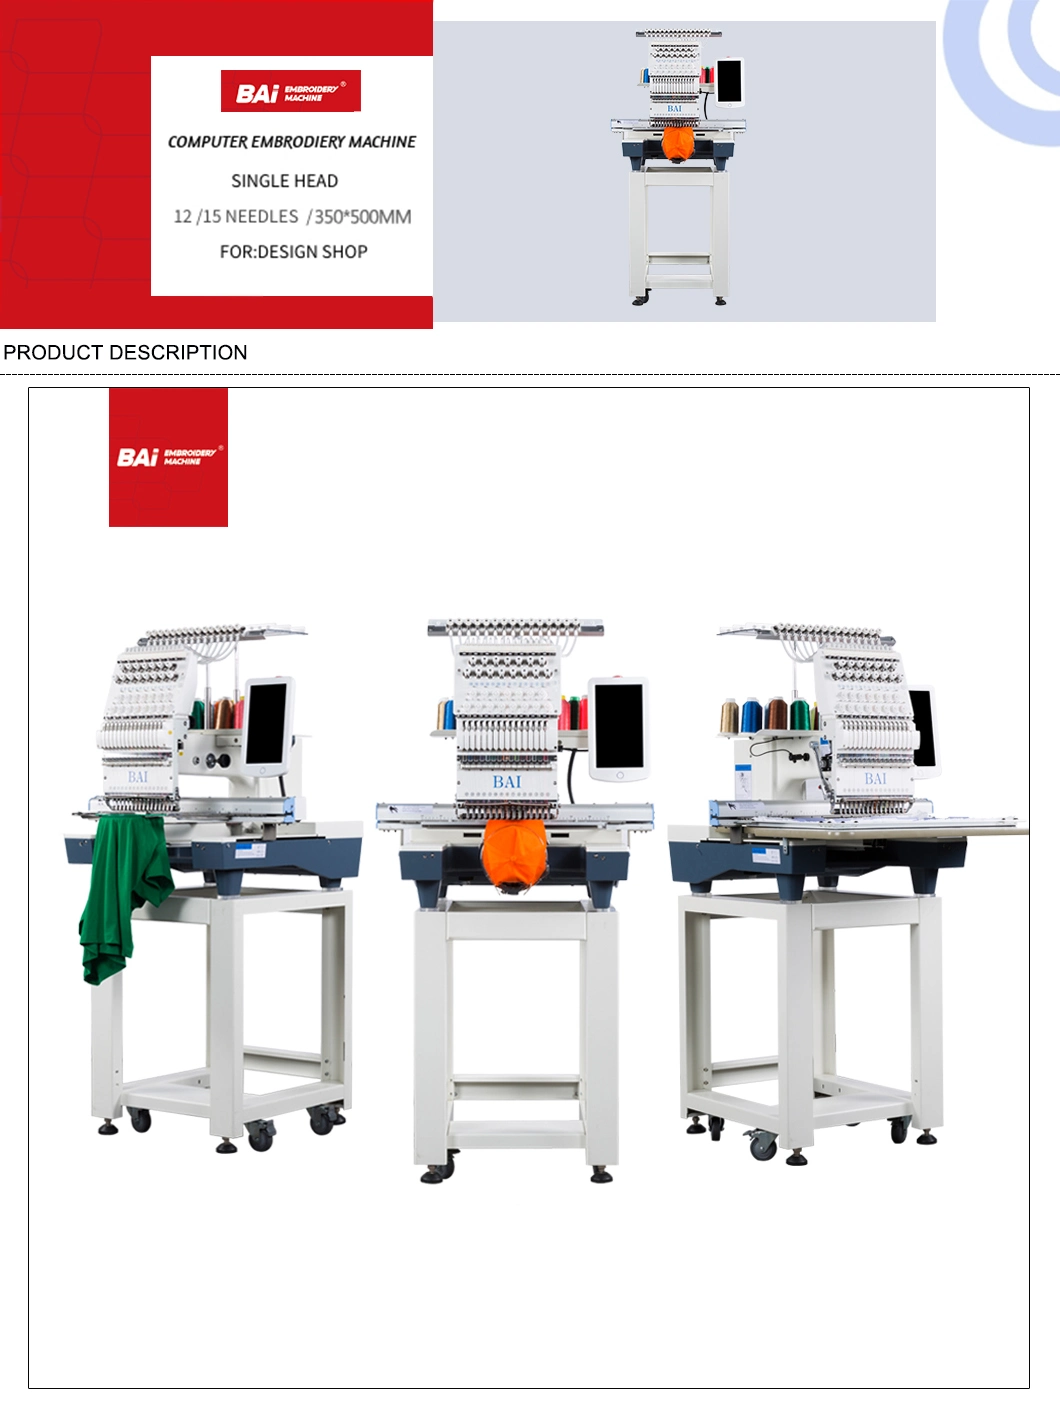 Bai Embroidery Machine Is a Typical Multifunctional Embroidery Machine Controlled by Computer